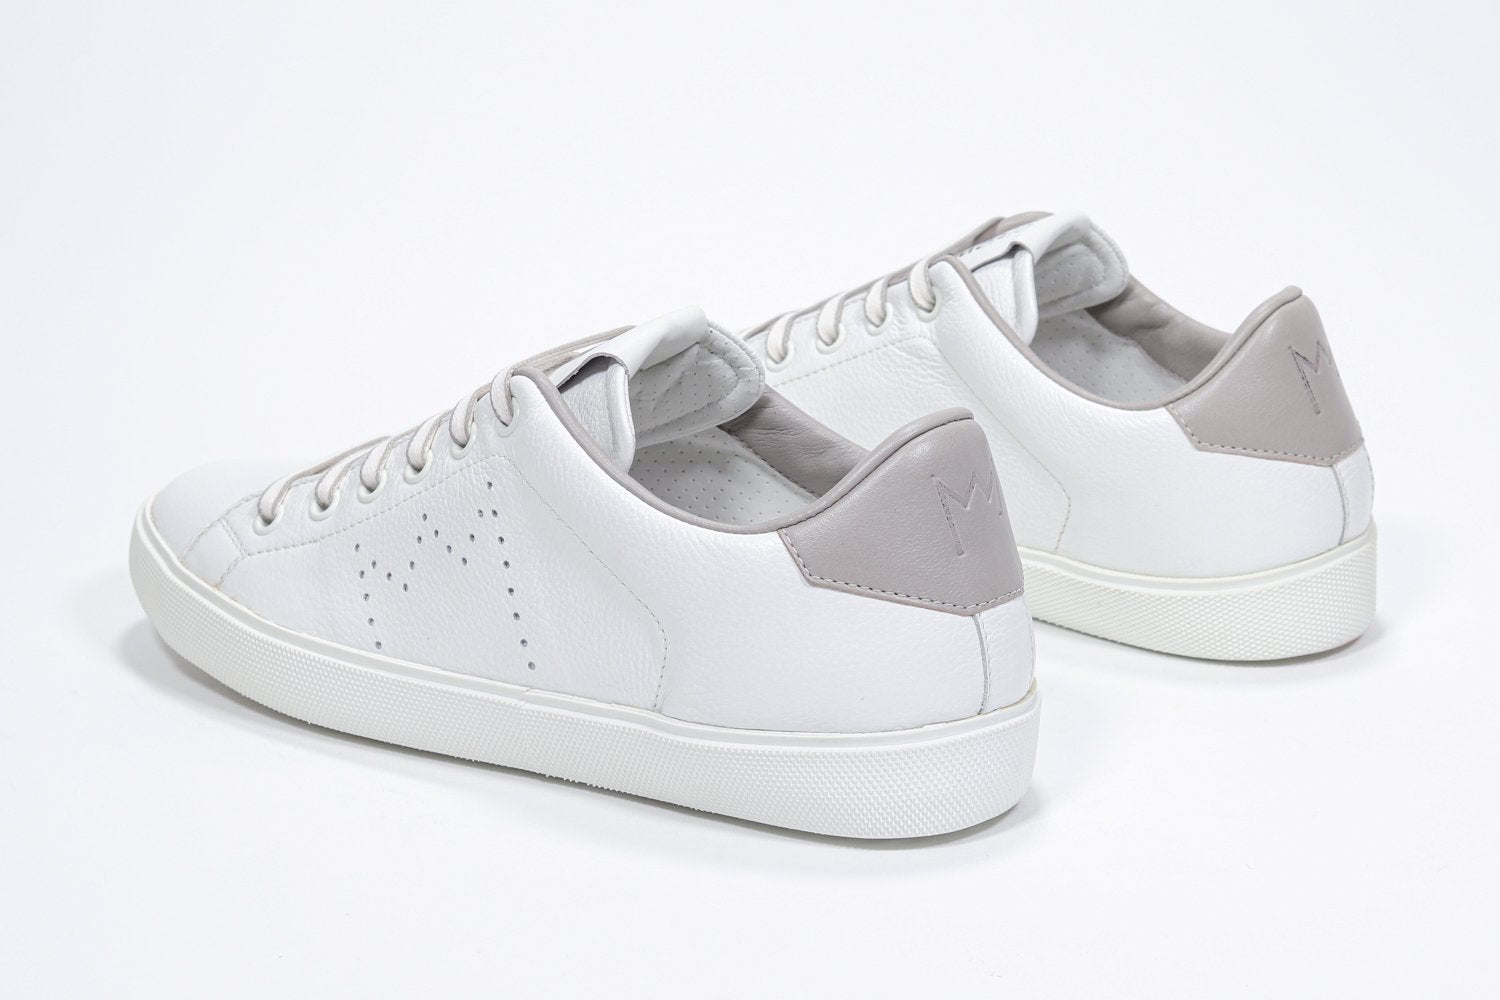 Three quarter back view of low top white sneaker with beige detailing and perforated crown logo on upper. Full leather upper and white rubber sole.